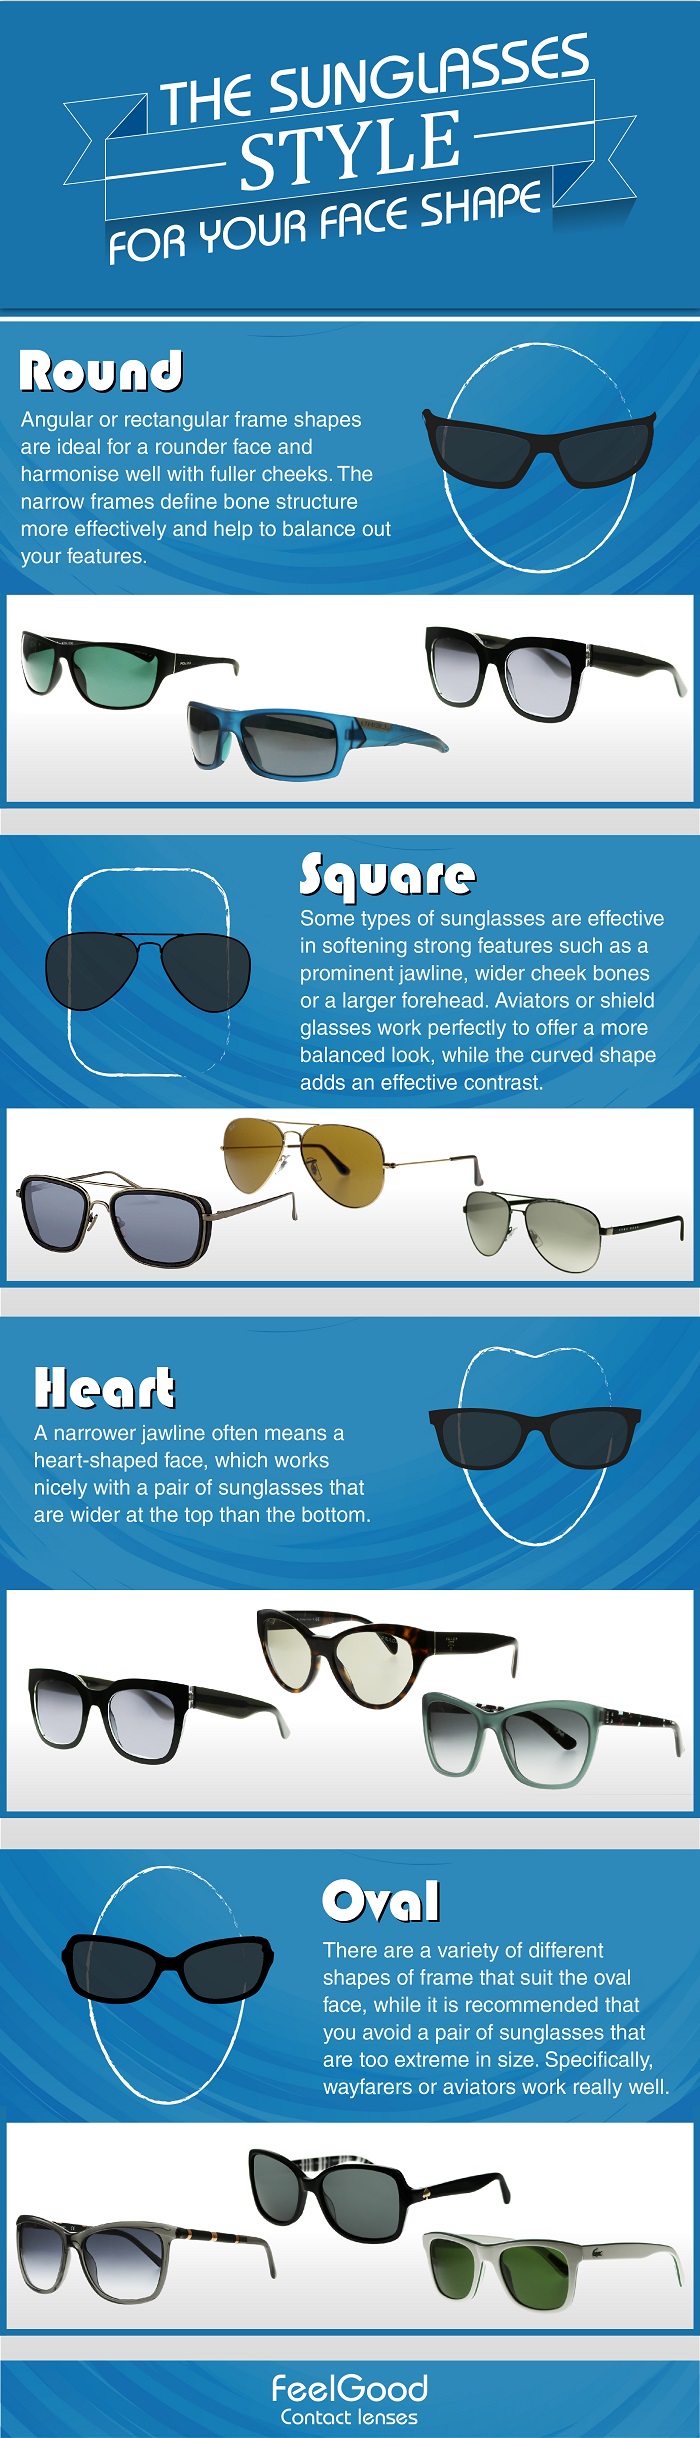 sunglasses for your face shape infographic